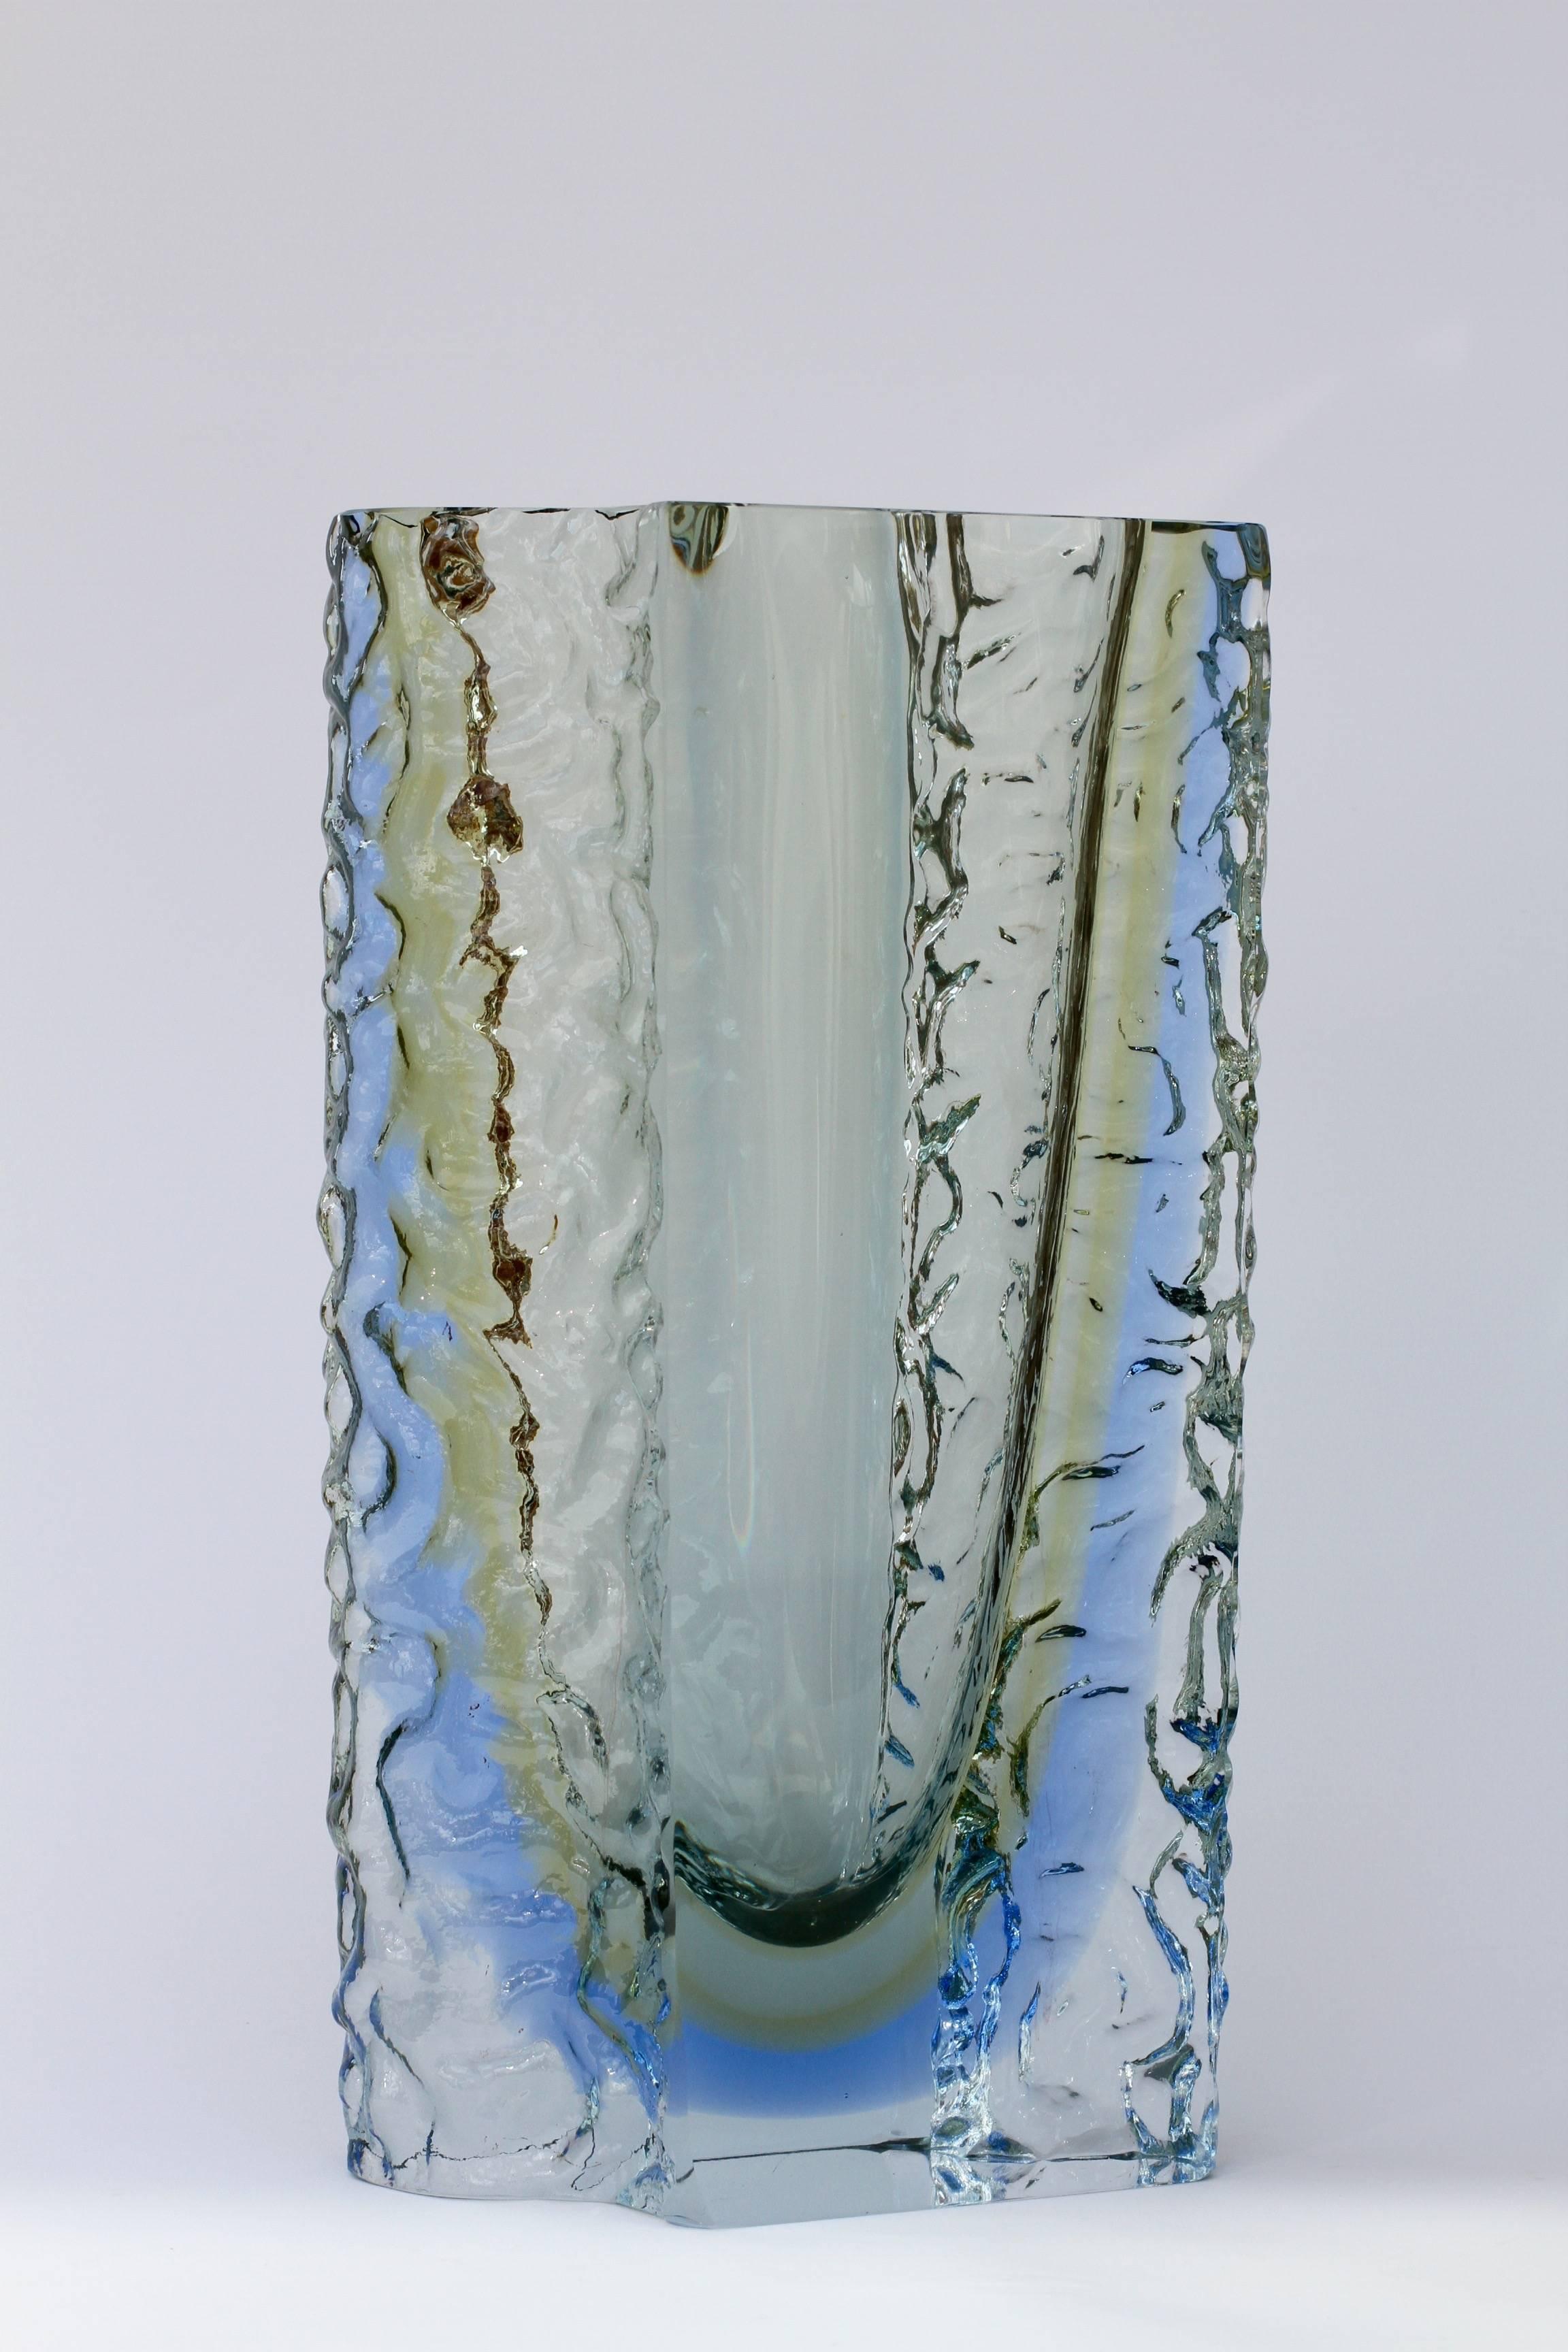 Large vintage midcentury Murano art glass vase attributed to Mandruzzato, circa 1980s. The combination of ocean blue and the textured clear 'Sommerso' ice glass is simply mesmerizing.

Stunning in every way this piece of italian art glass is a